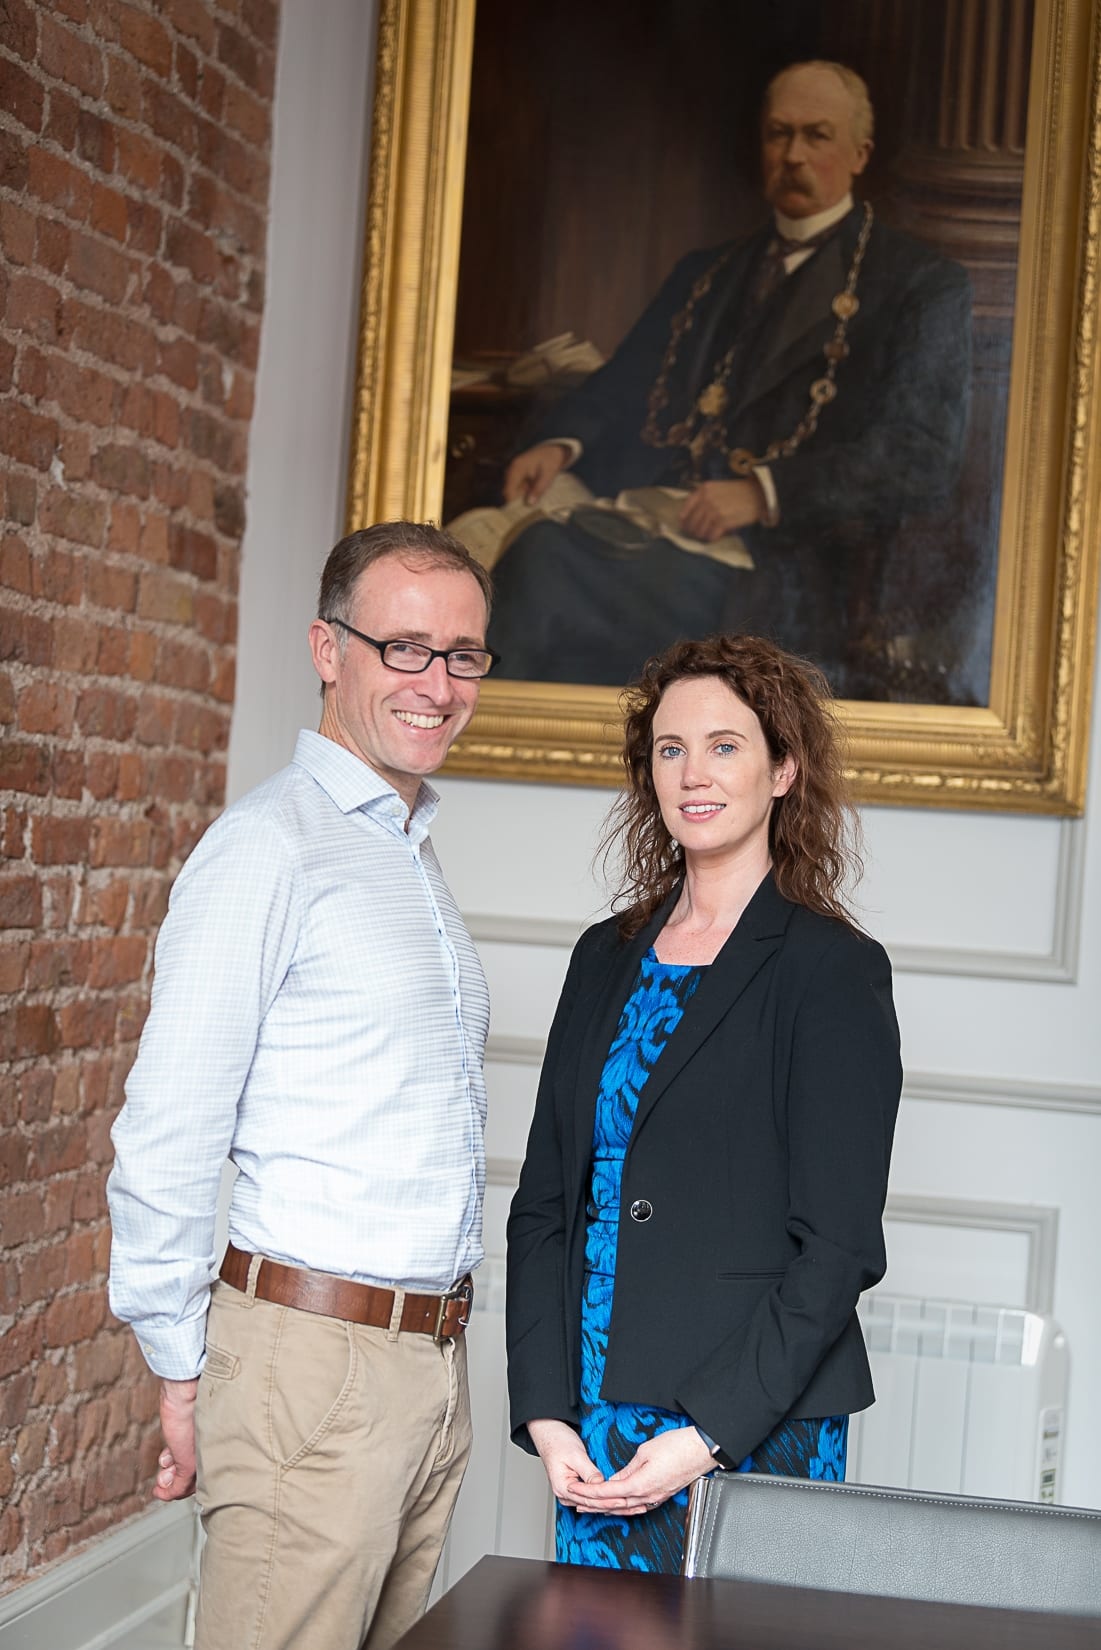 Maximise your Membership Event which took place in the Limerick Chamber Boardroom on the 11th September 2019. From left to right: David Bourke - NTES, Mary McNamee - Limerick Chamber.